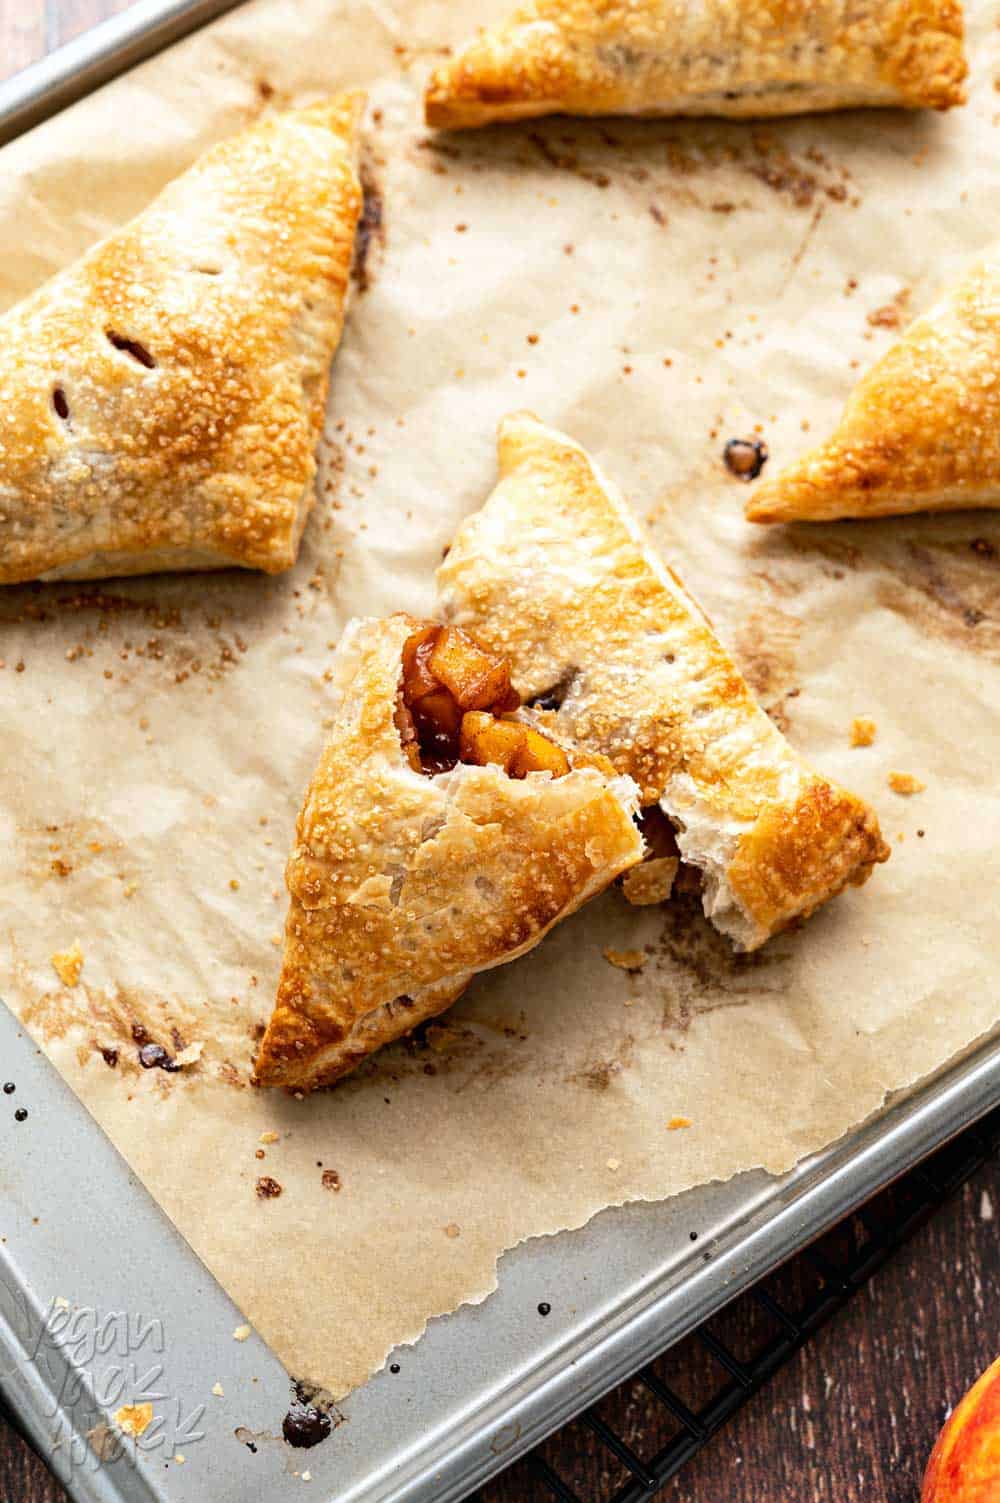 Four apple turnovers on a paper-lined baking sheet with apples